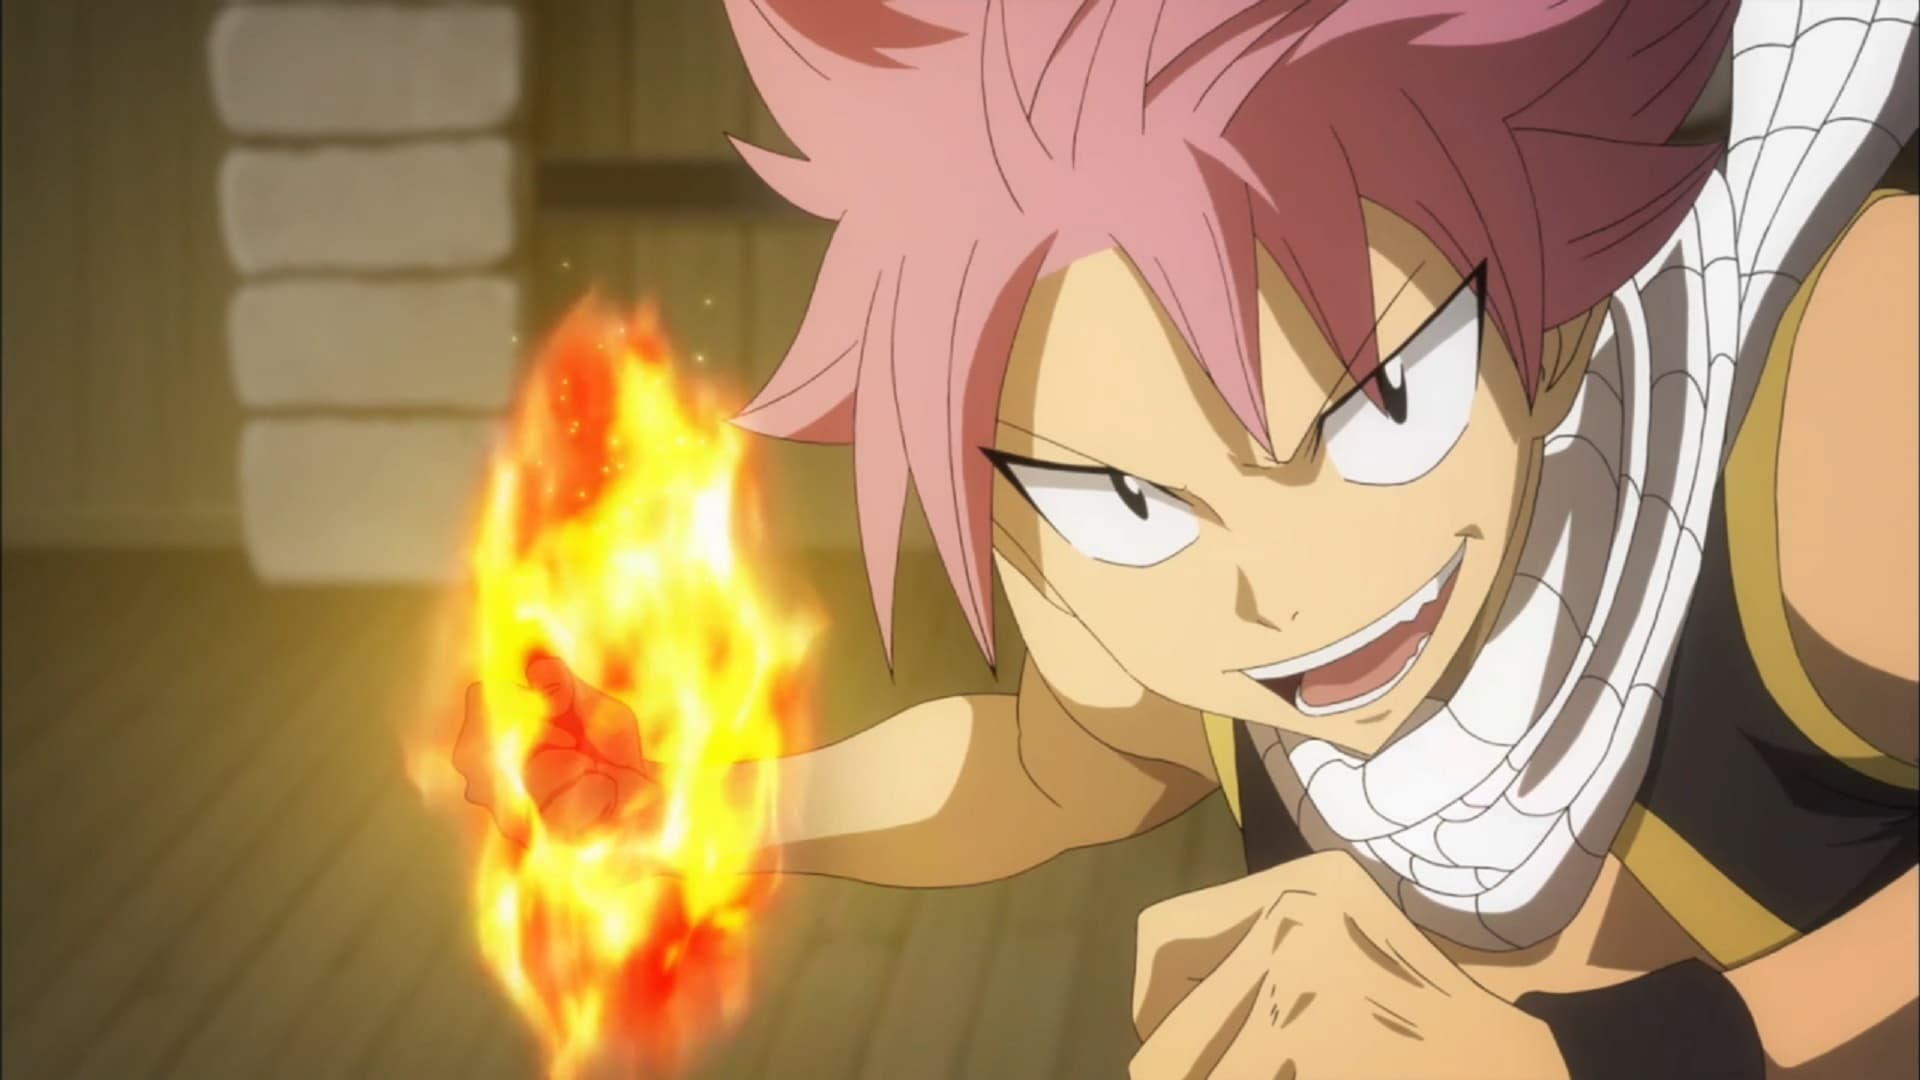 adrian palma recommends Fairy Tail Season 1 Episode 1